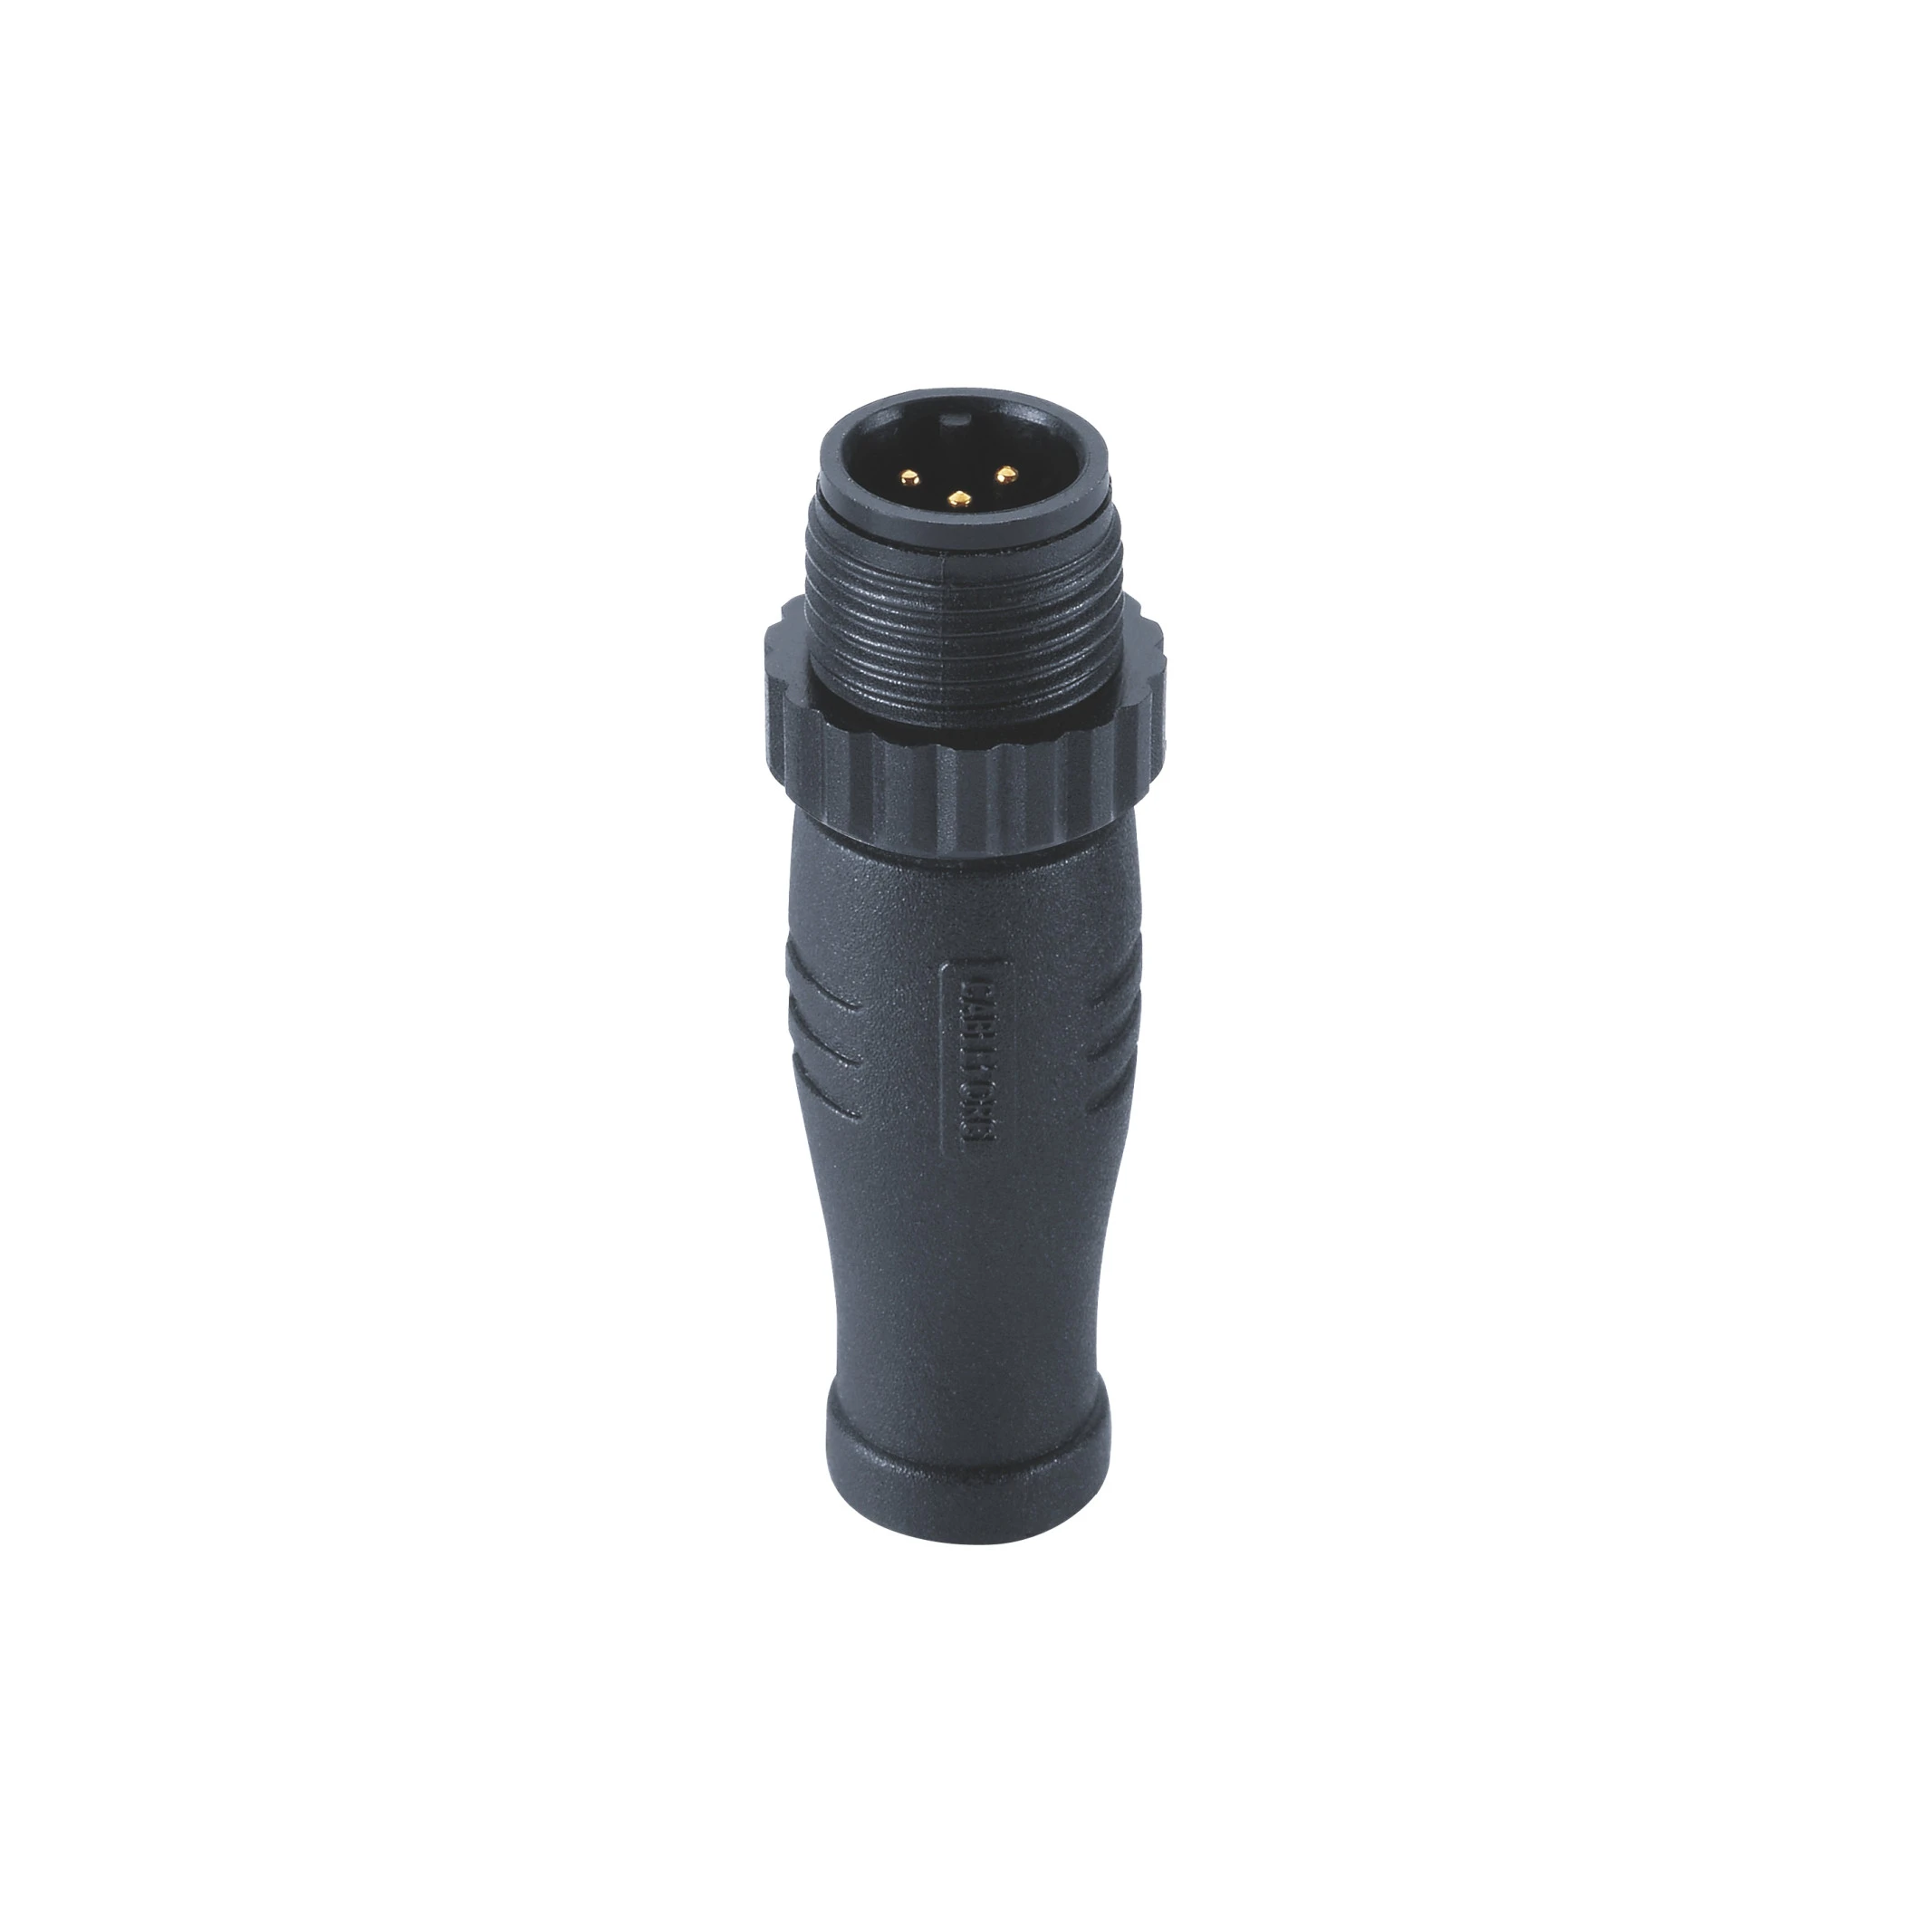 Application marine M12 terminator connector 5pin A Code female with 120ohm resistor plastic screws